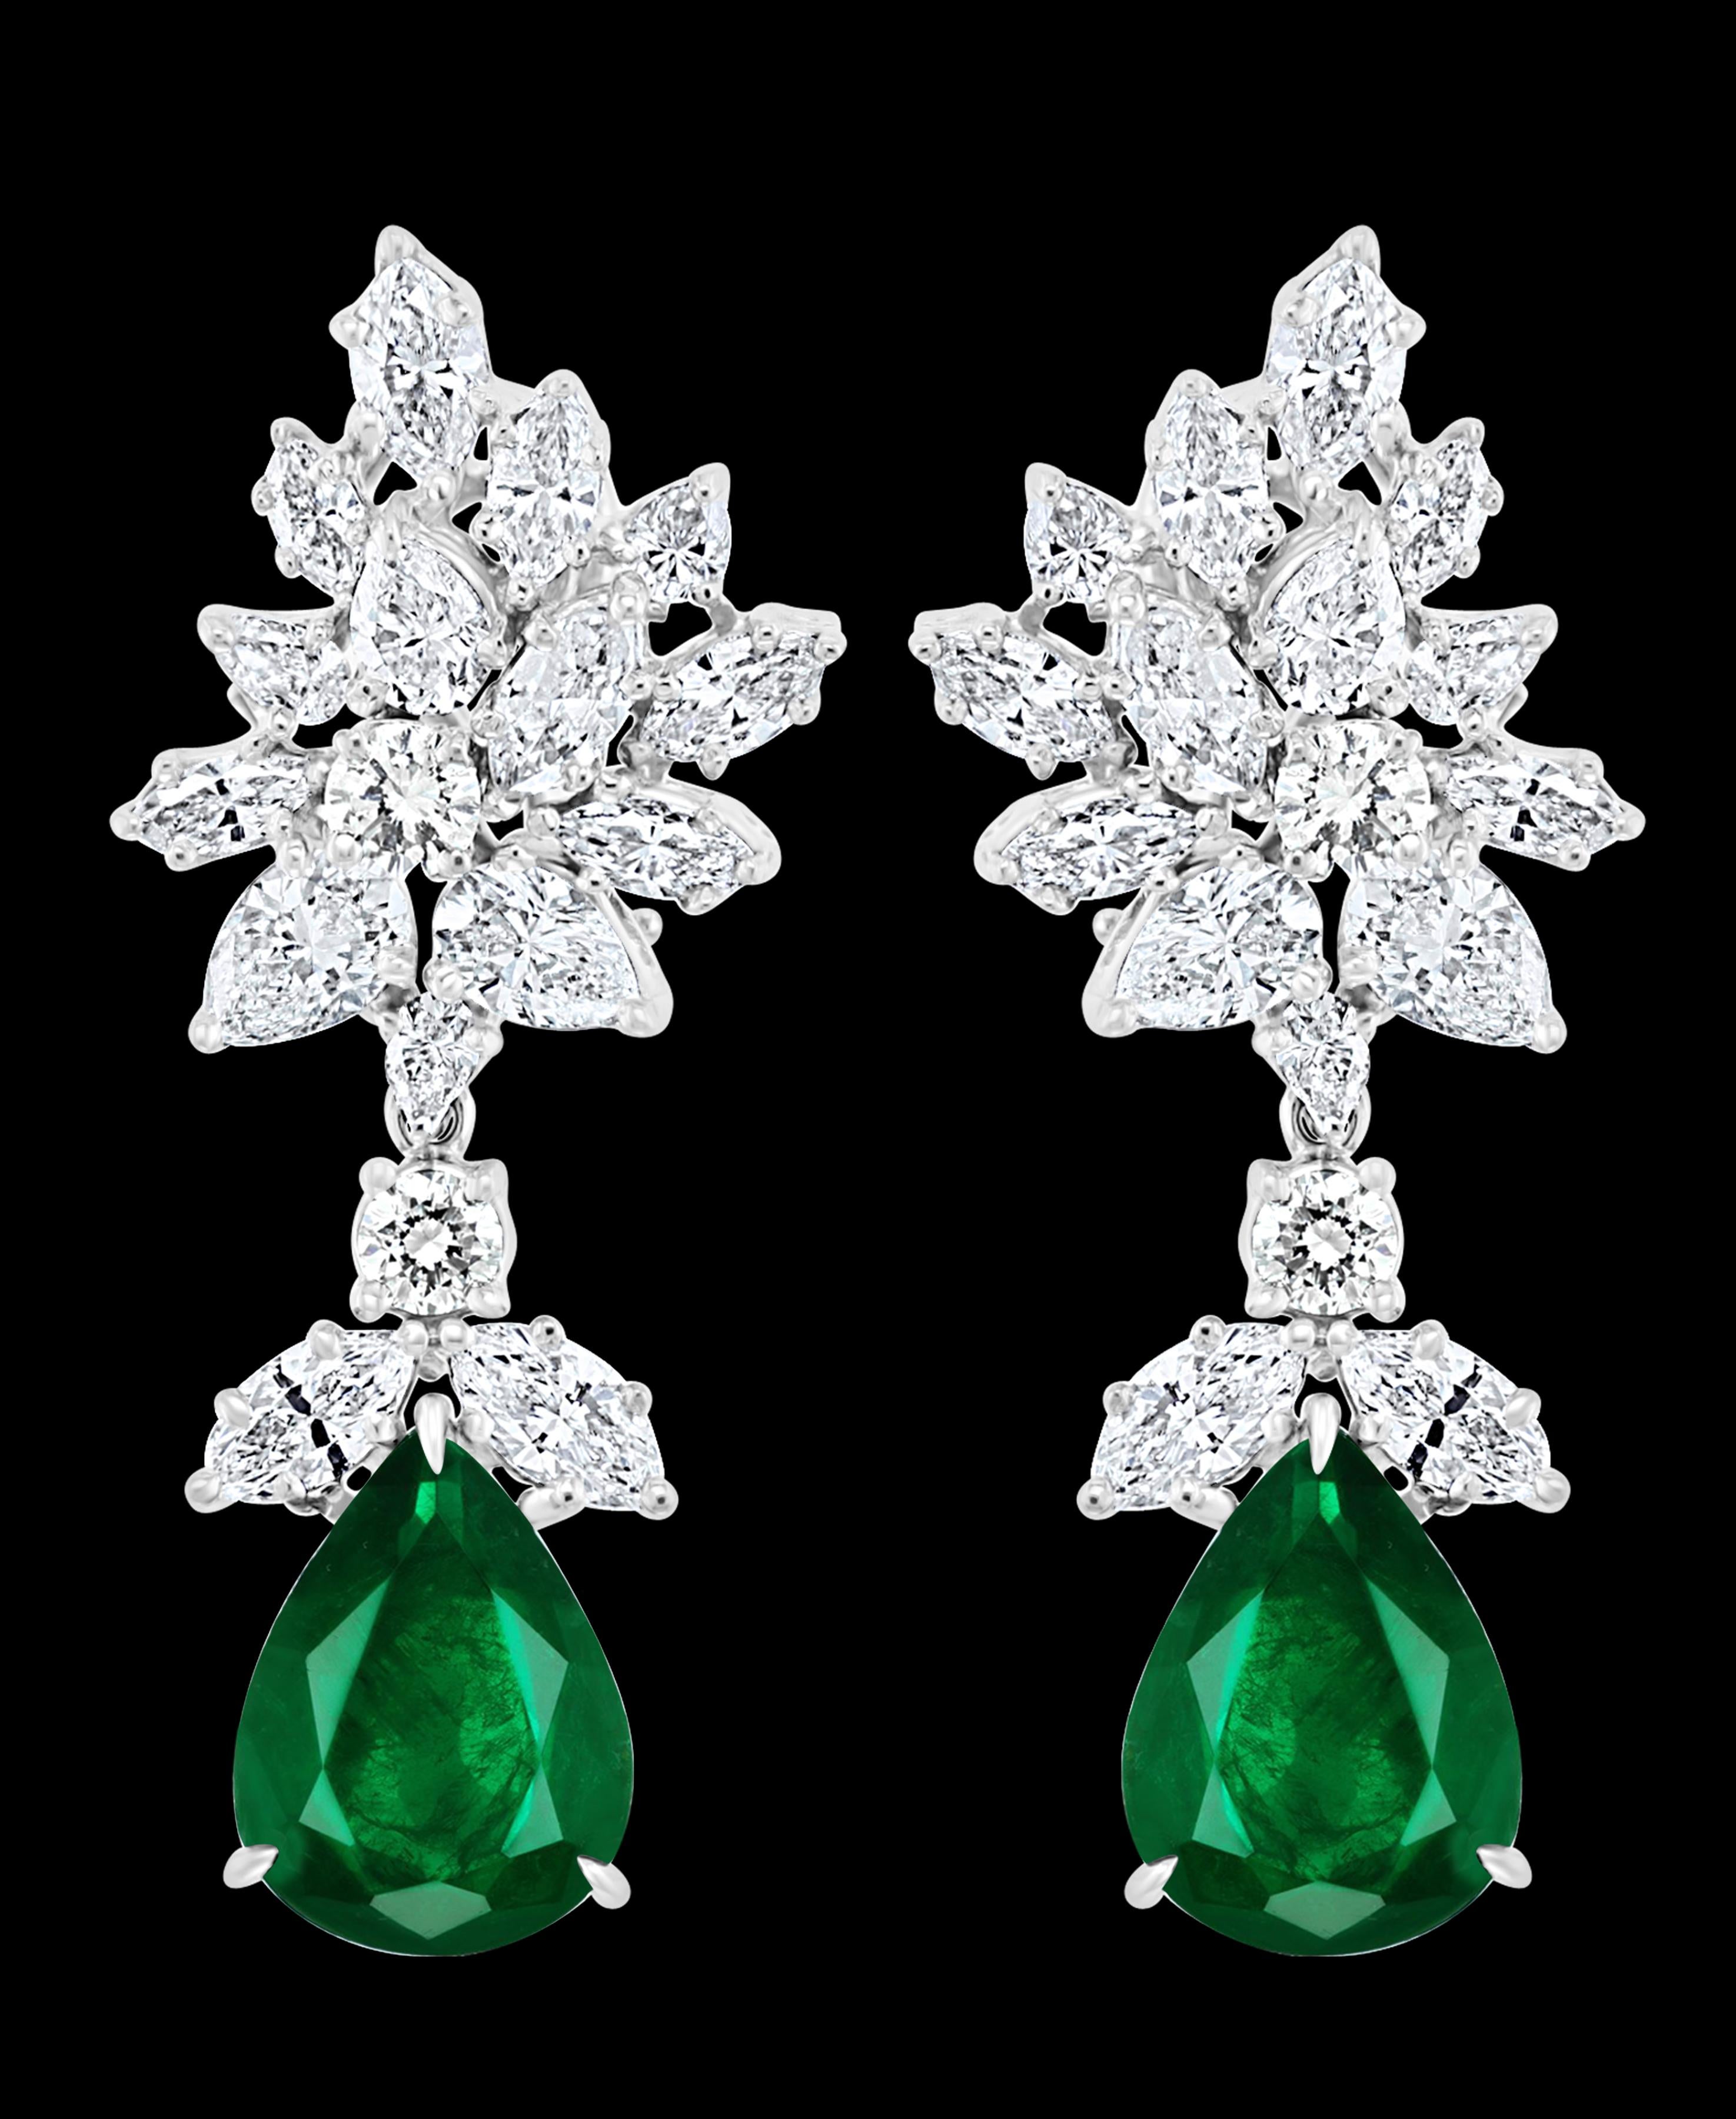 6.79 Ct Certified Colombian Minor Emerald Diamond  Removable Drop Earrings Platinum
These Earrings are detachable meaning pendulum with emeralds  and Diamond  slides off so the top Diamond Earrings can be worn alone.
This exquisite pair of earrings